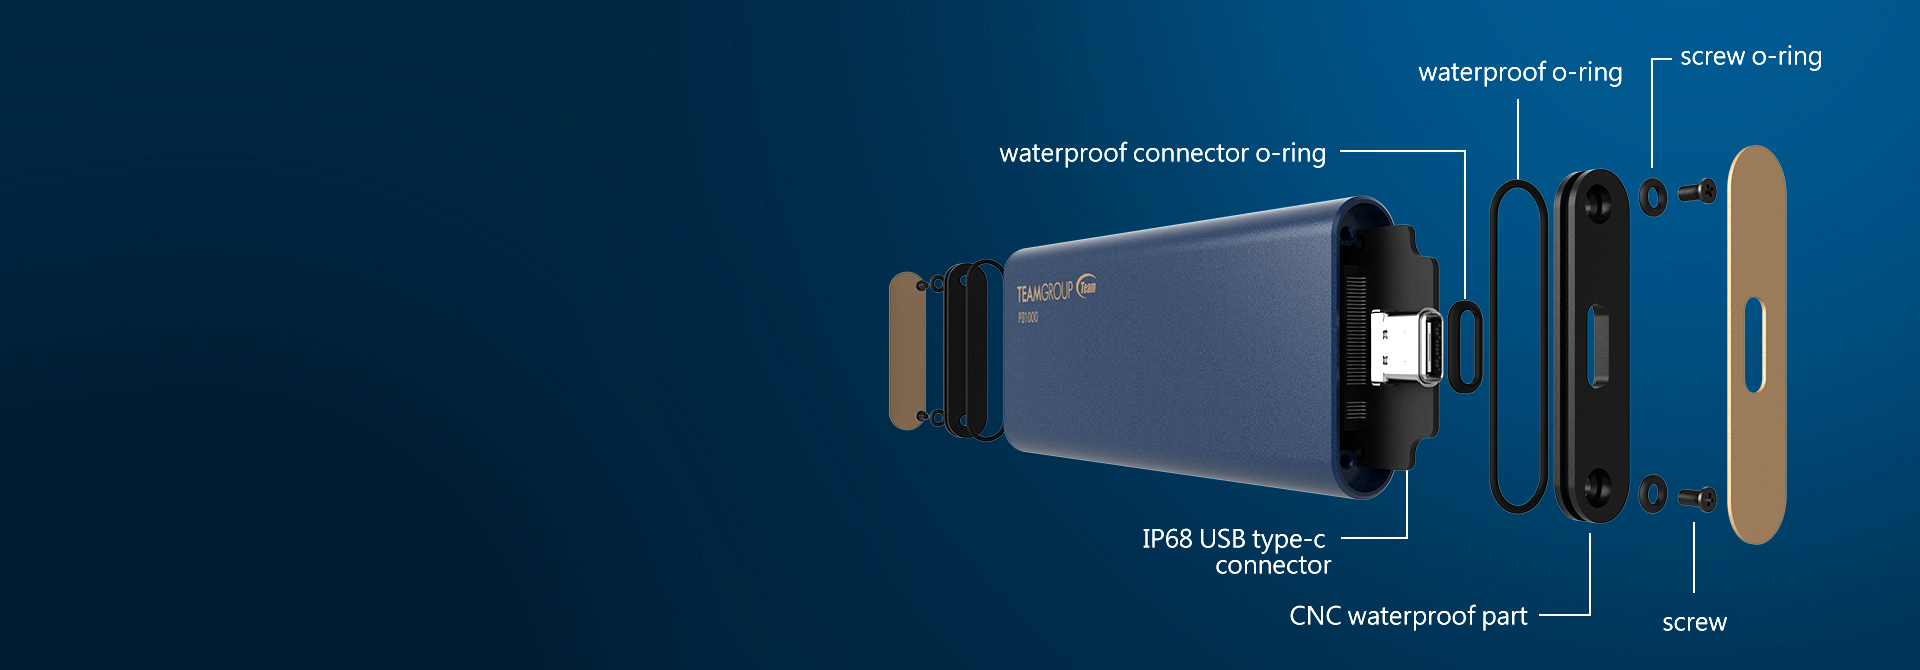 With IP68 waterproof and dustproof connector, there’s no need for the dust plug[1]